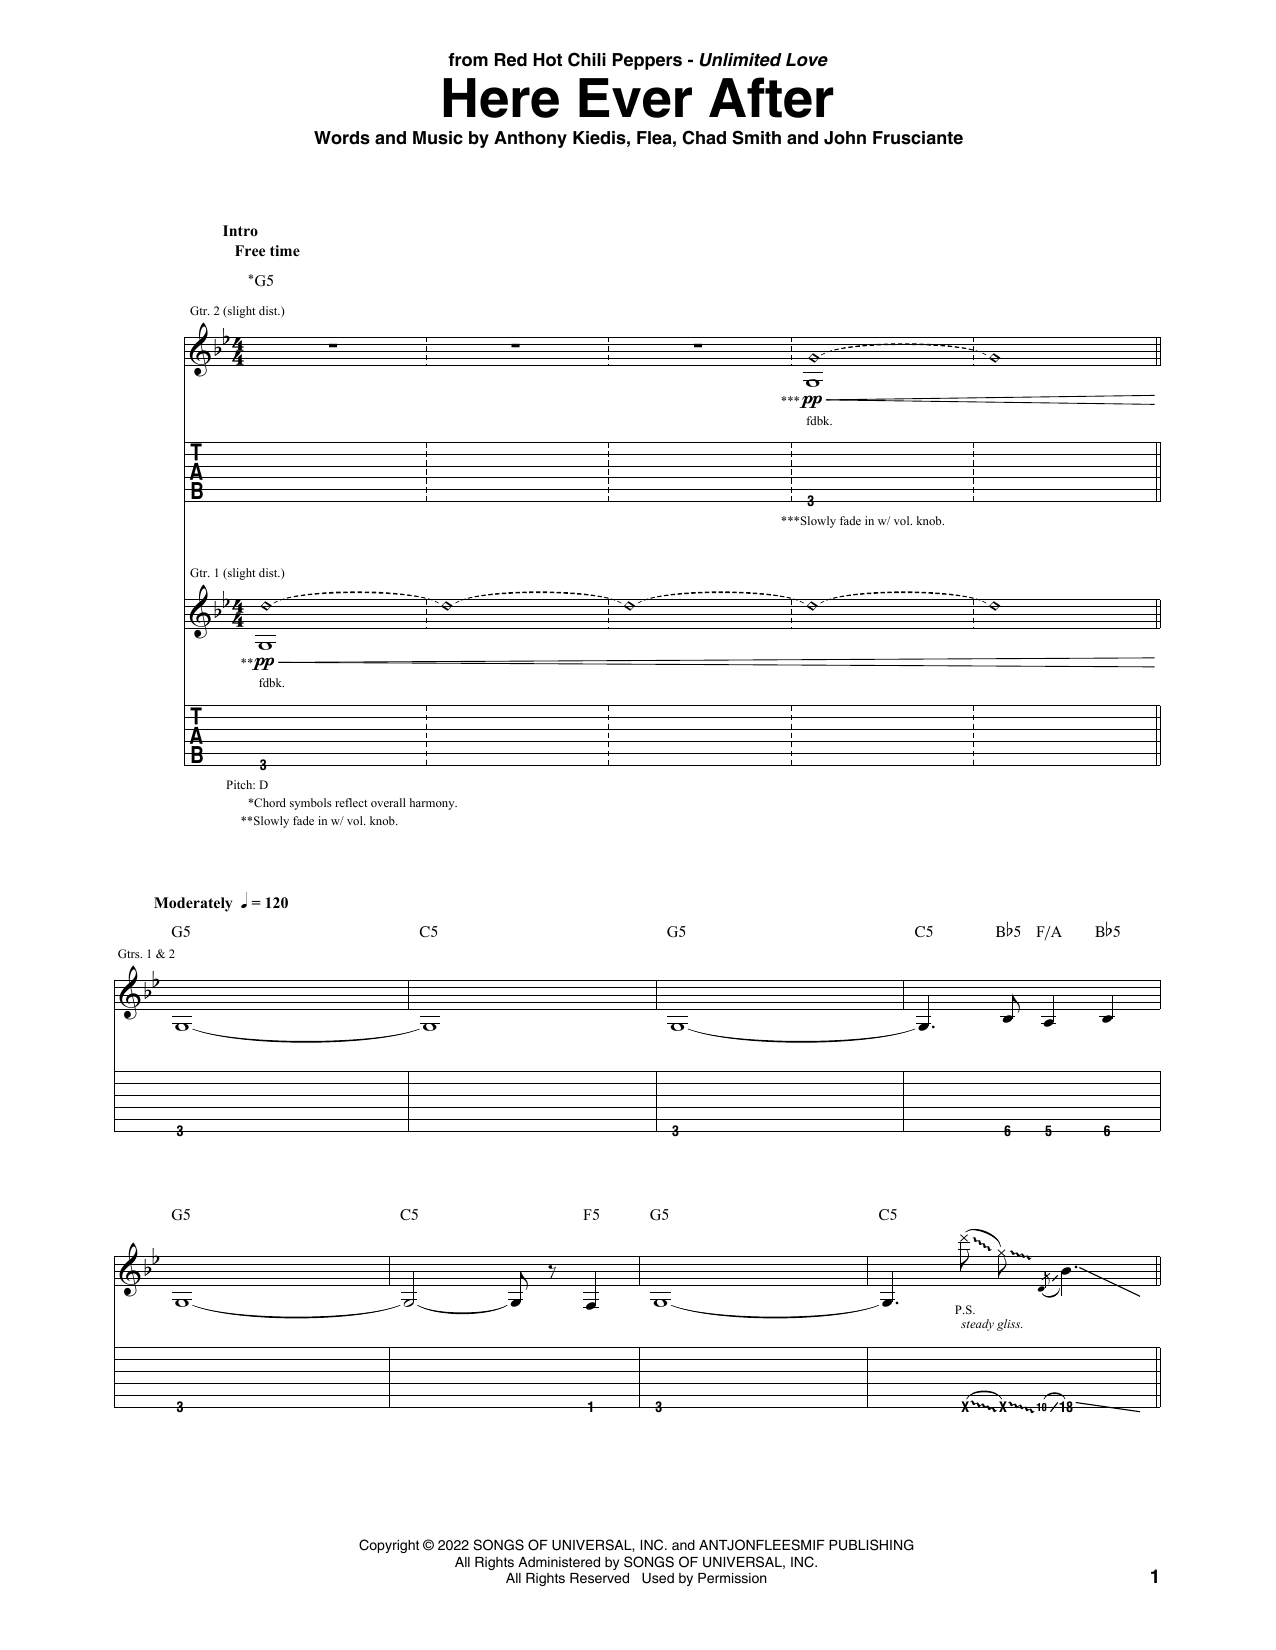 Download Red Hot Chili Peppers Here Ever After Sheet Music